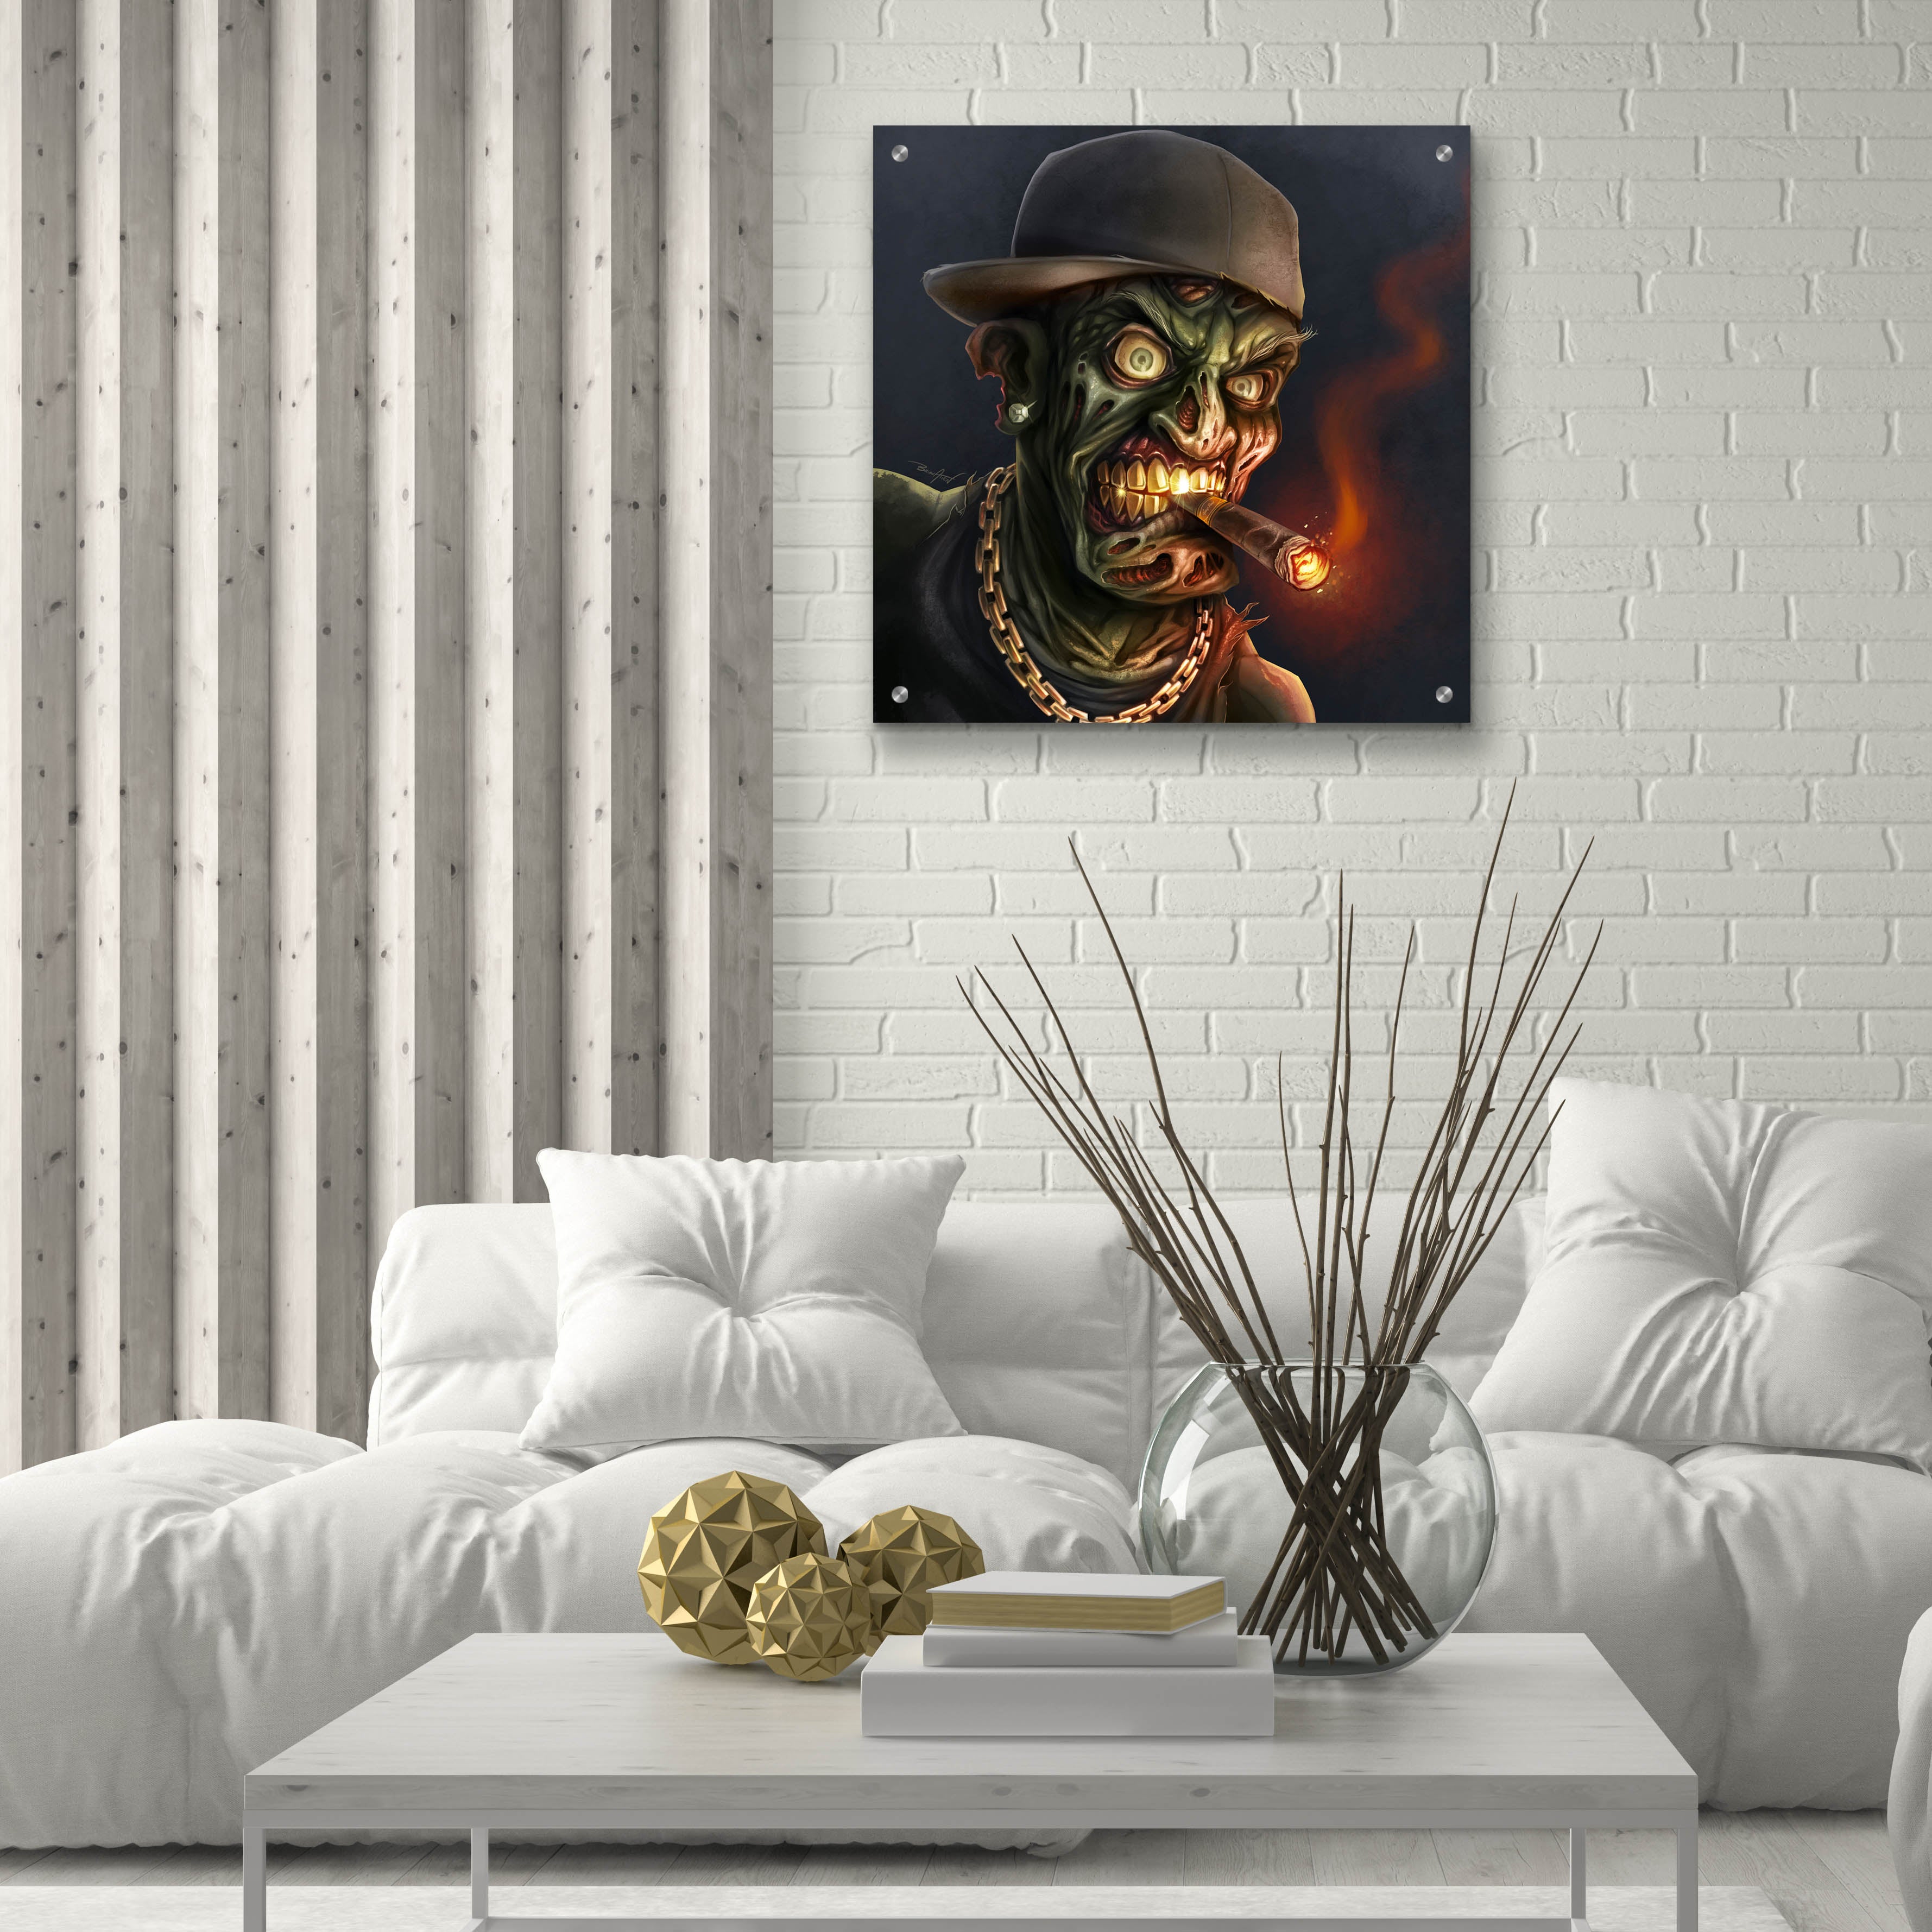 Epic Art 'Gangster Hip-Hop Zombie' by Flyland Designs, Acrylic